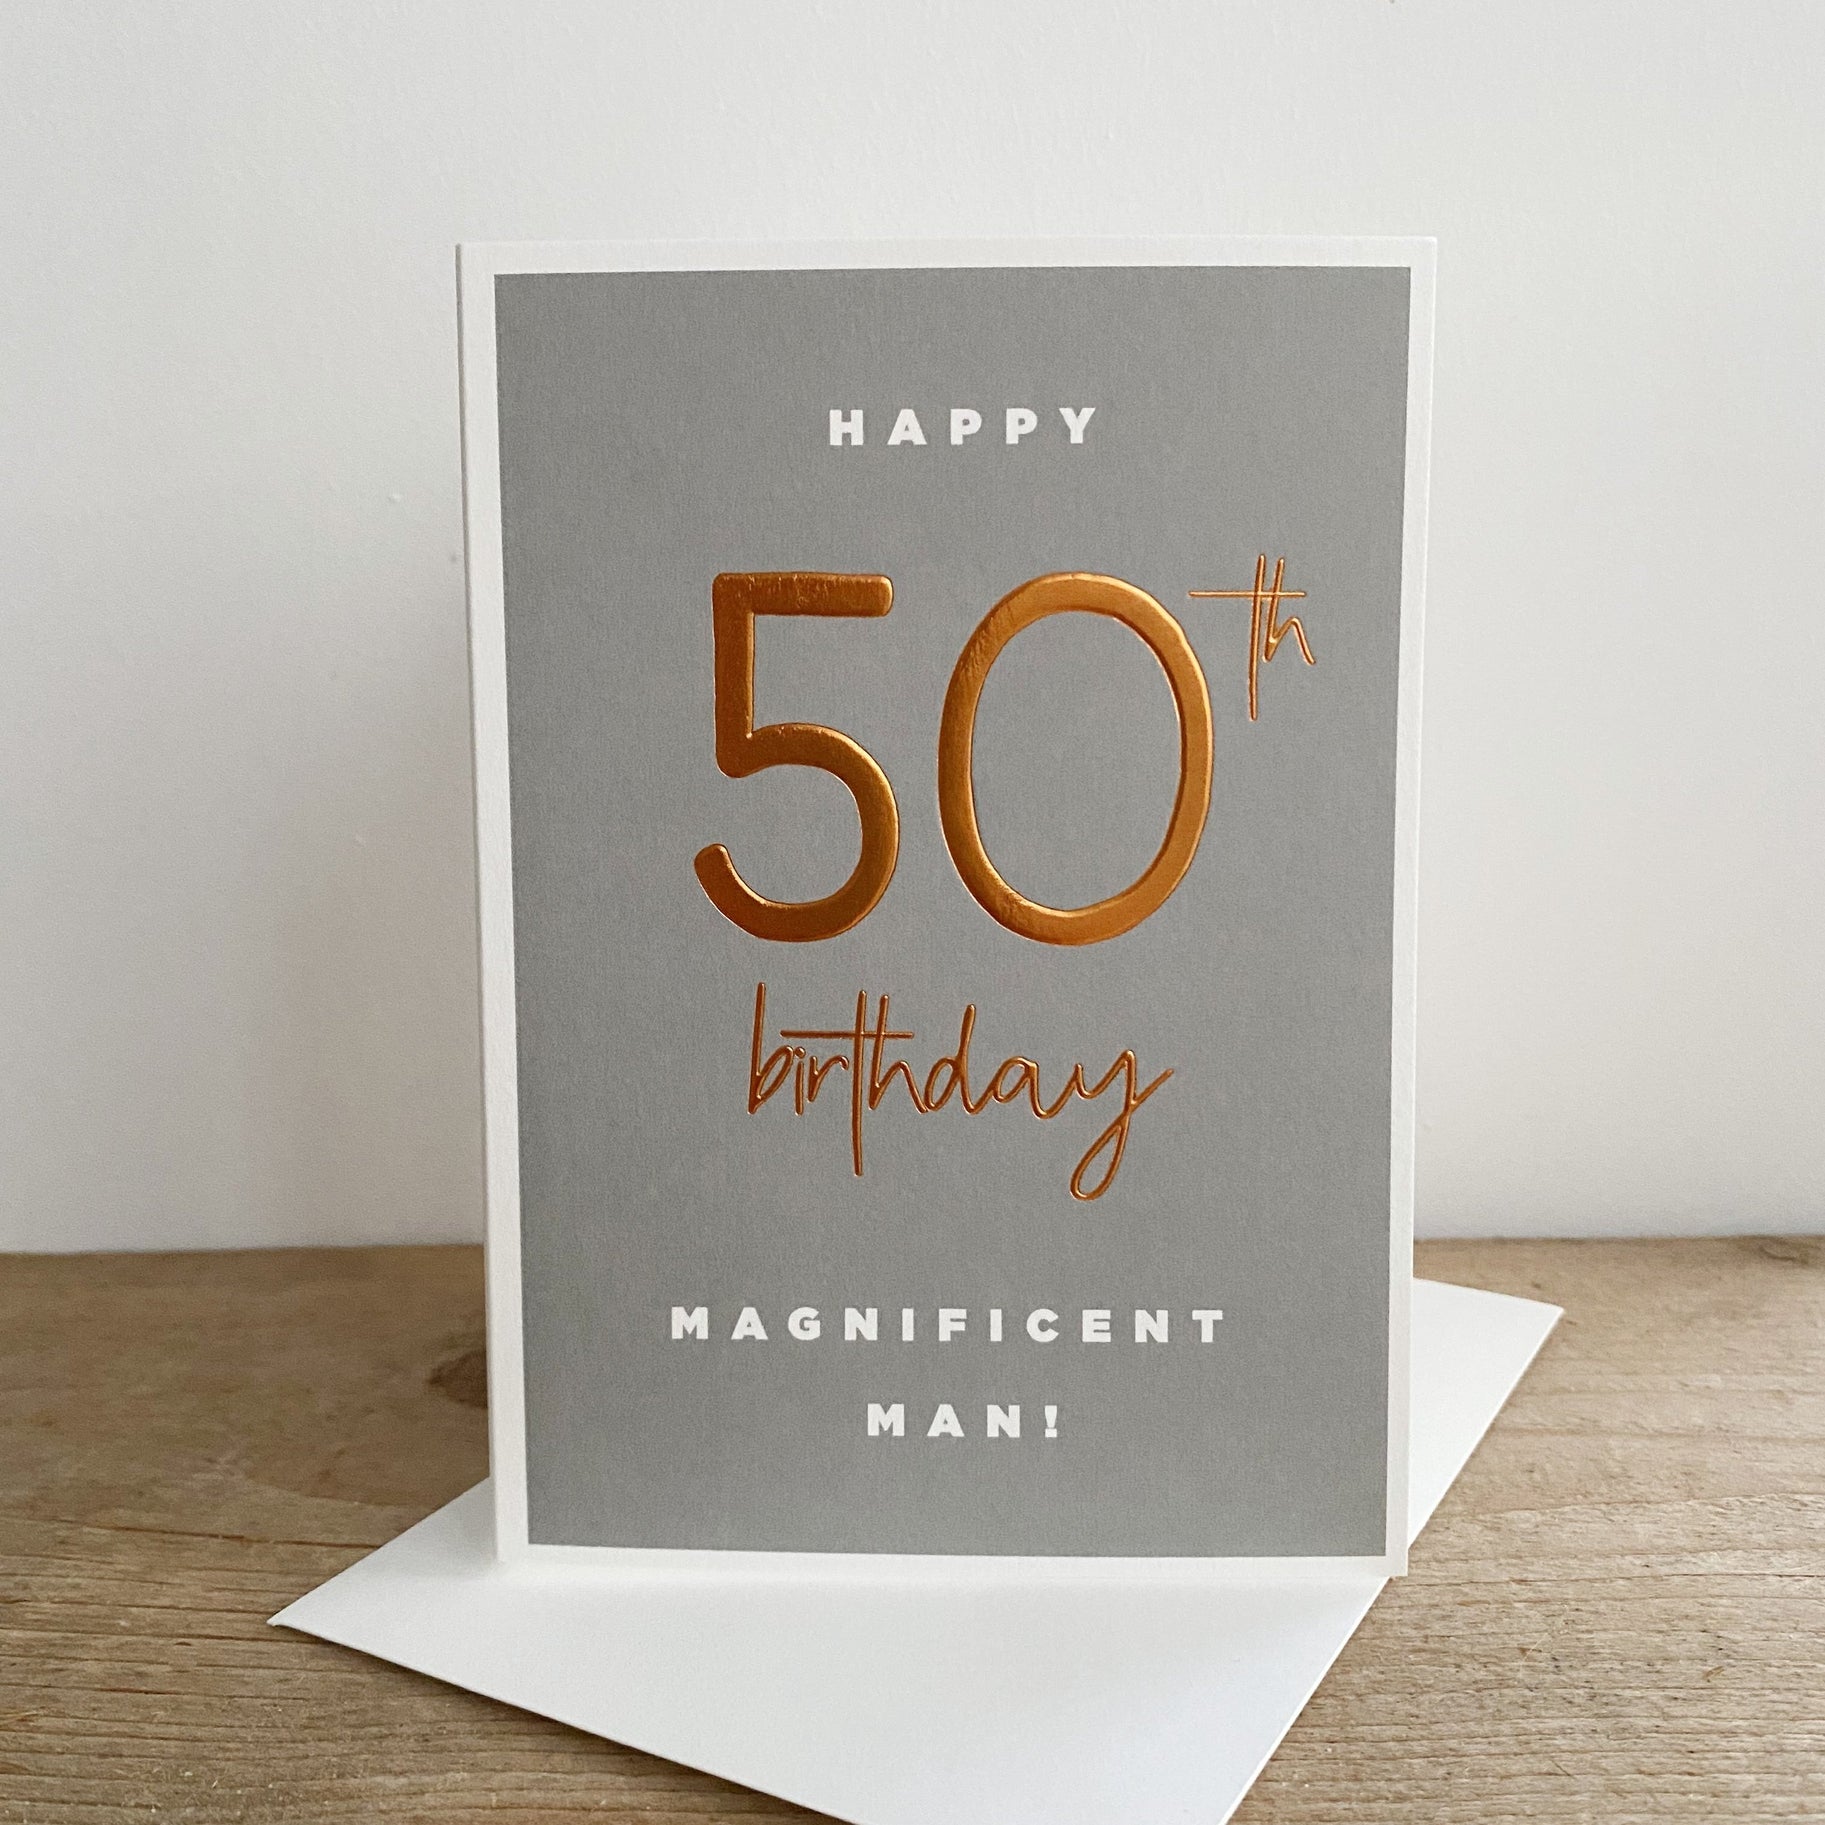 funny birthday wishes for men 50